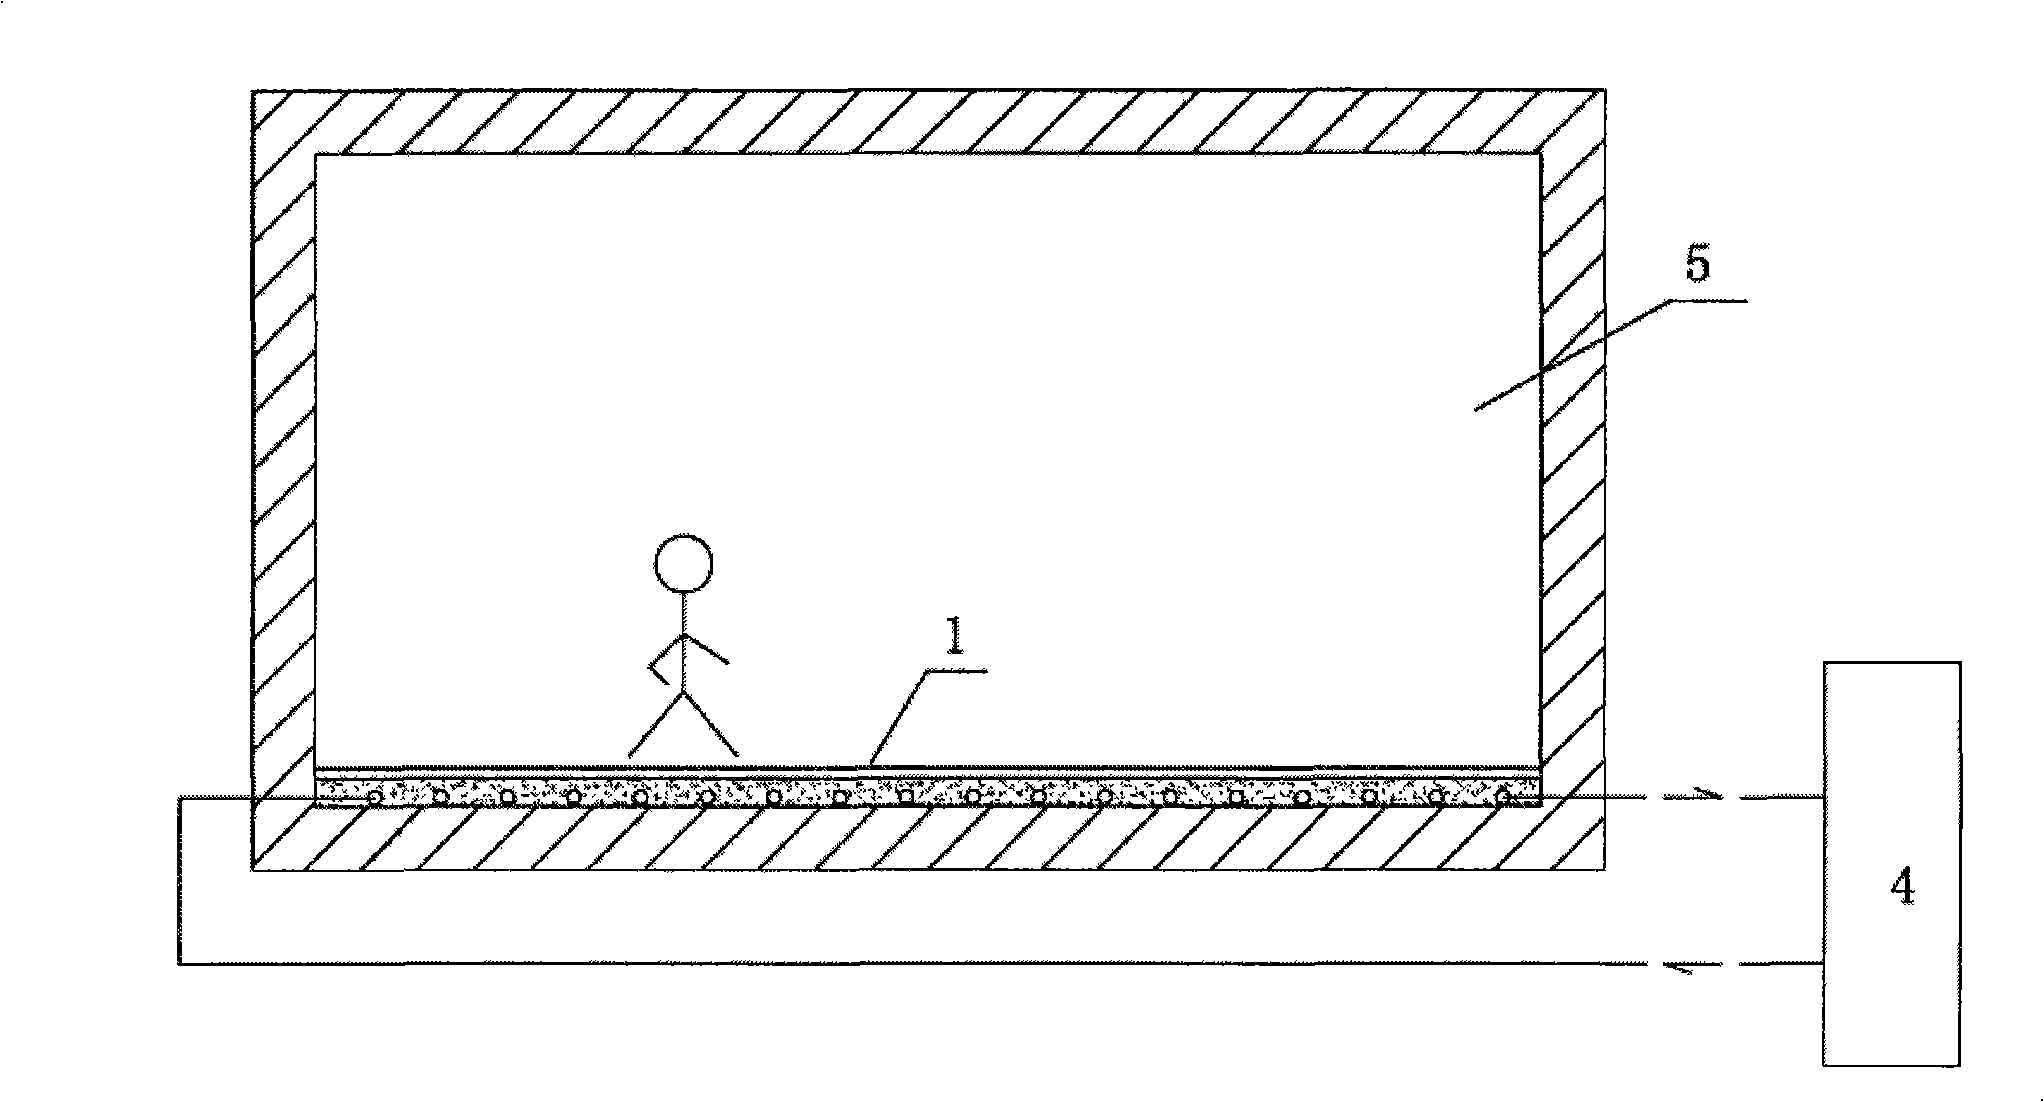 Full water capillary network air conditioner system and air conditioning method